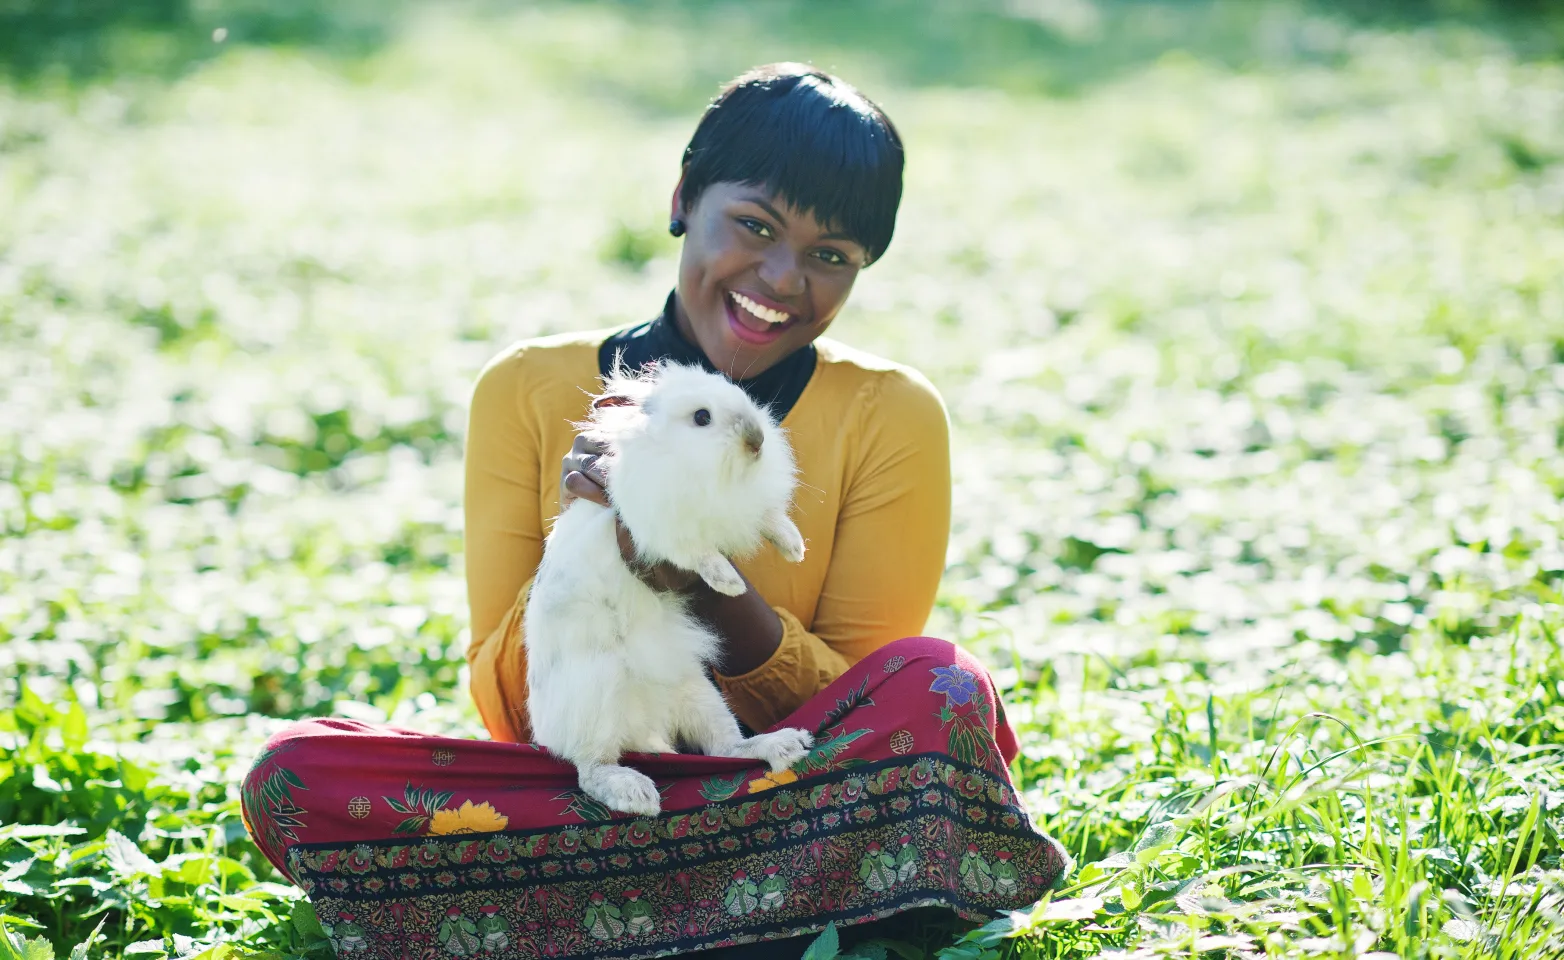 Woman sitting in grass holding a rabbit